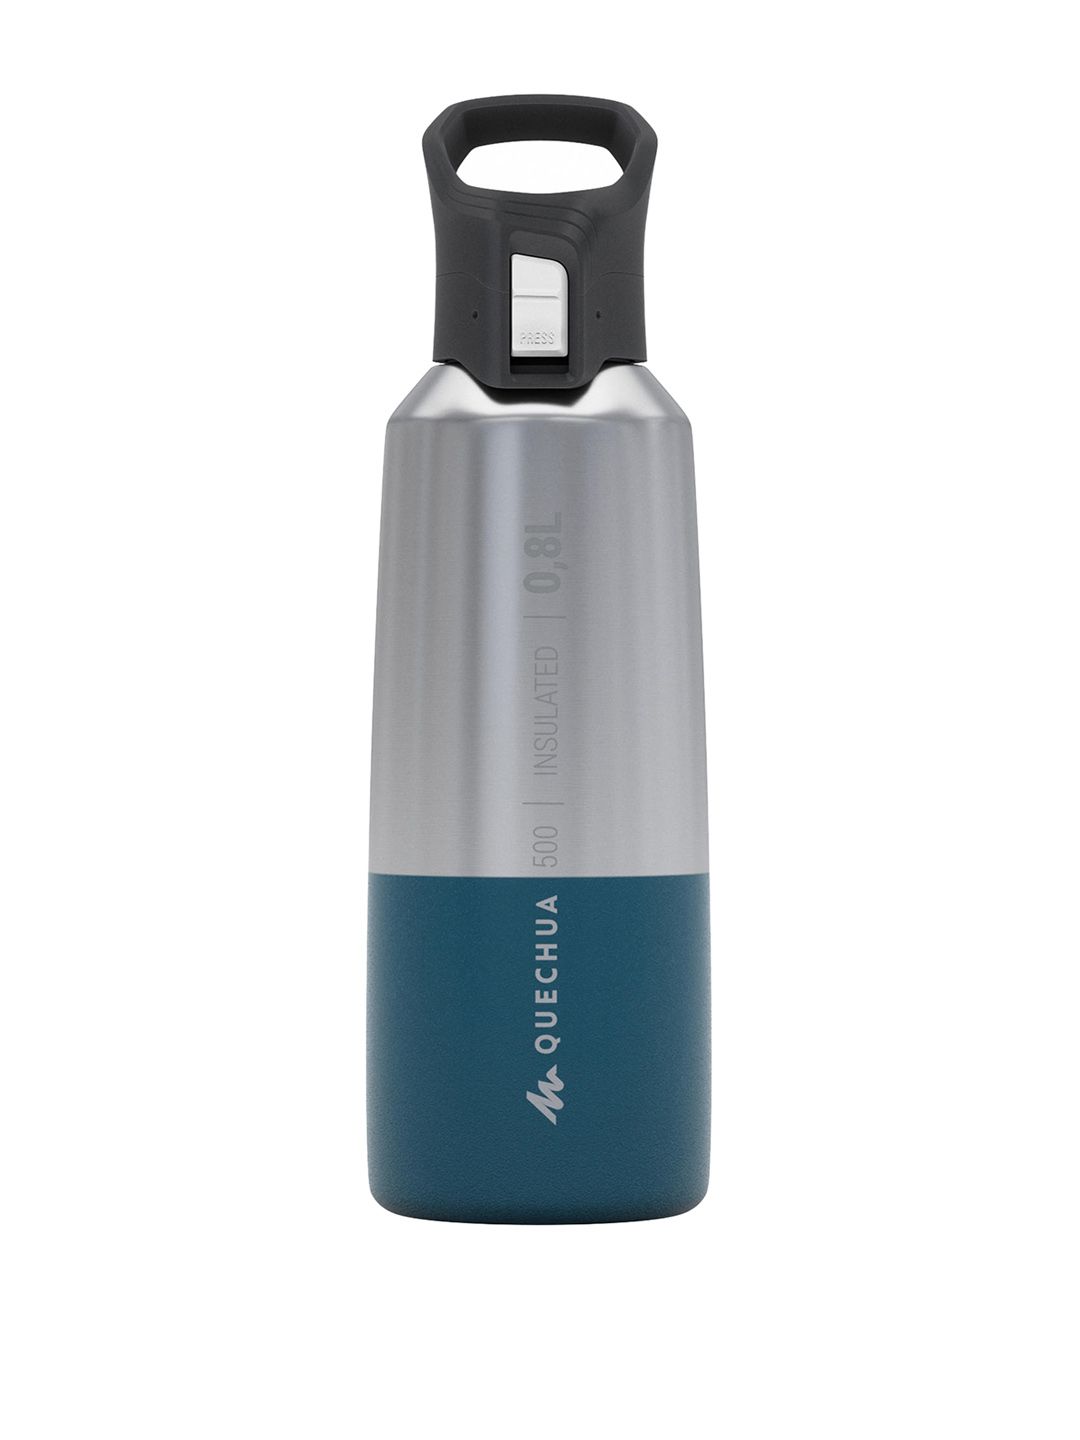 Quechua By Decathlon Blue Insulated Stainless Steel Hiking Flask MH500 0.8L Price in India